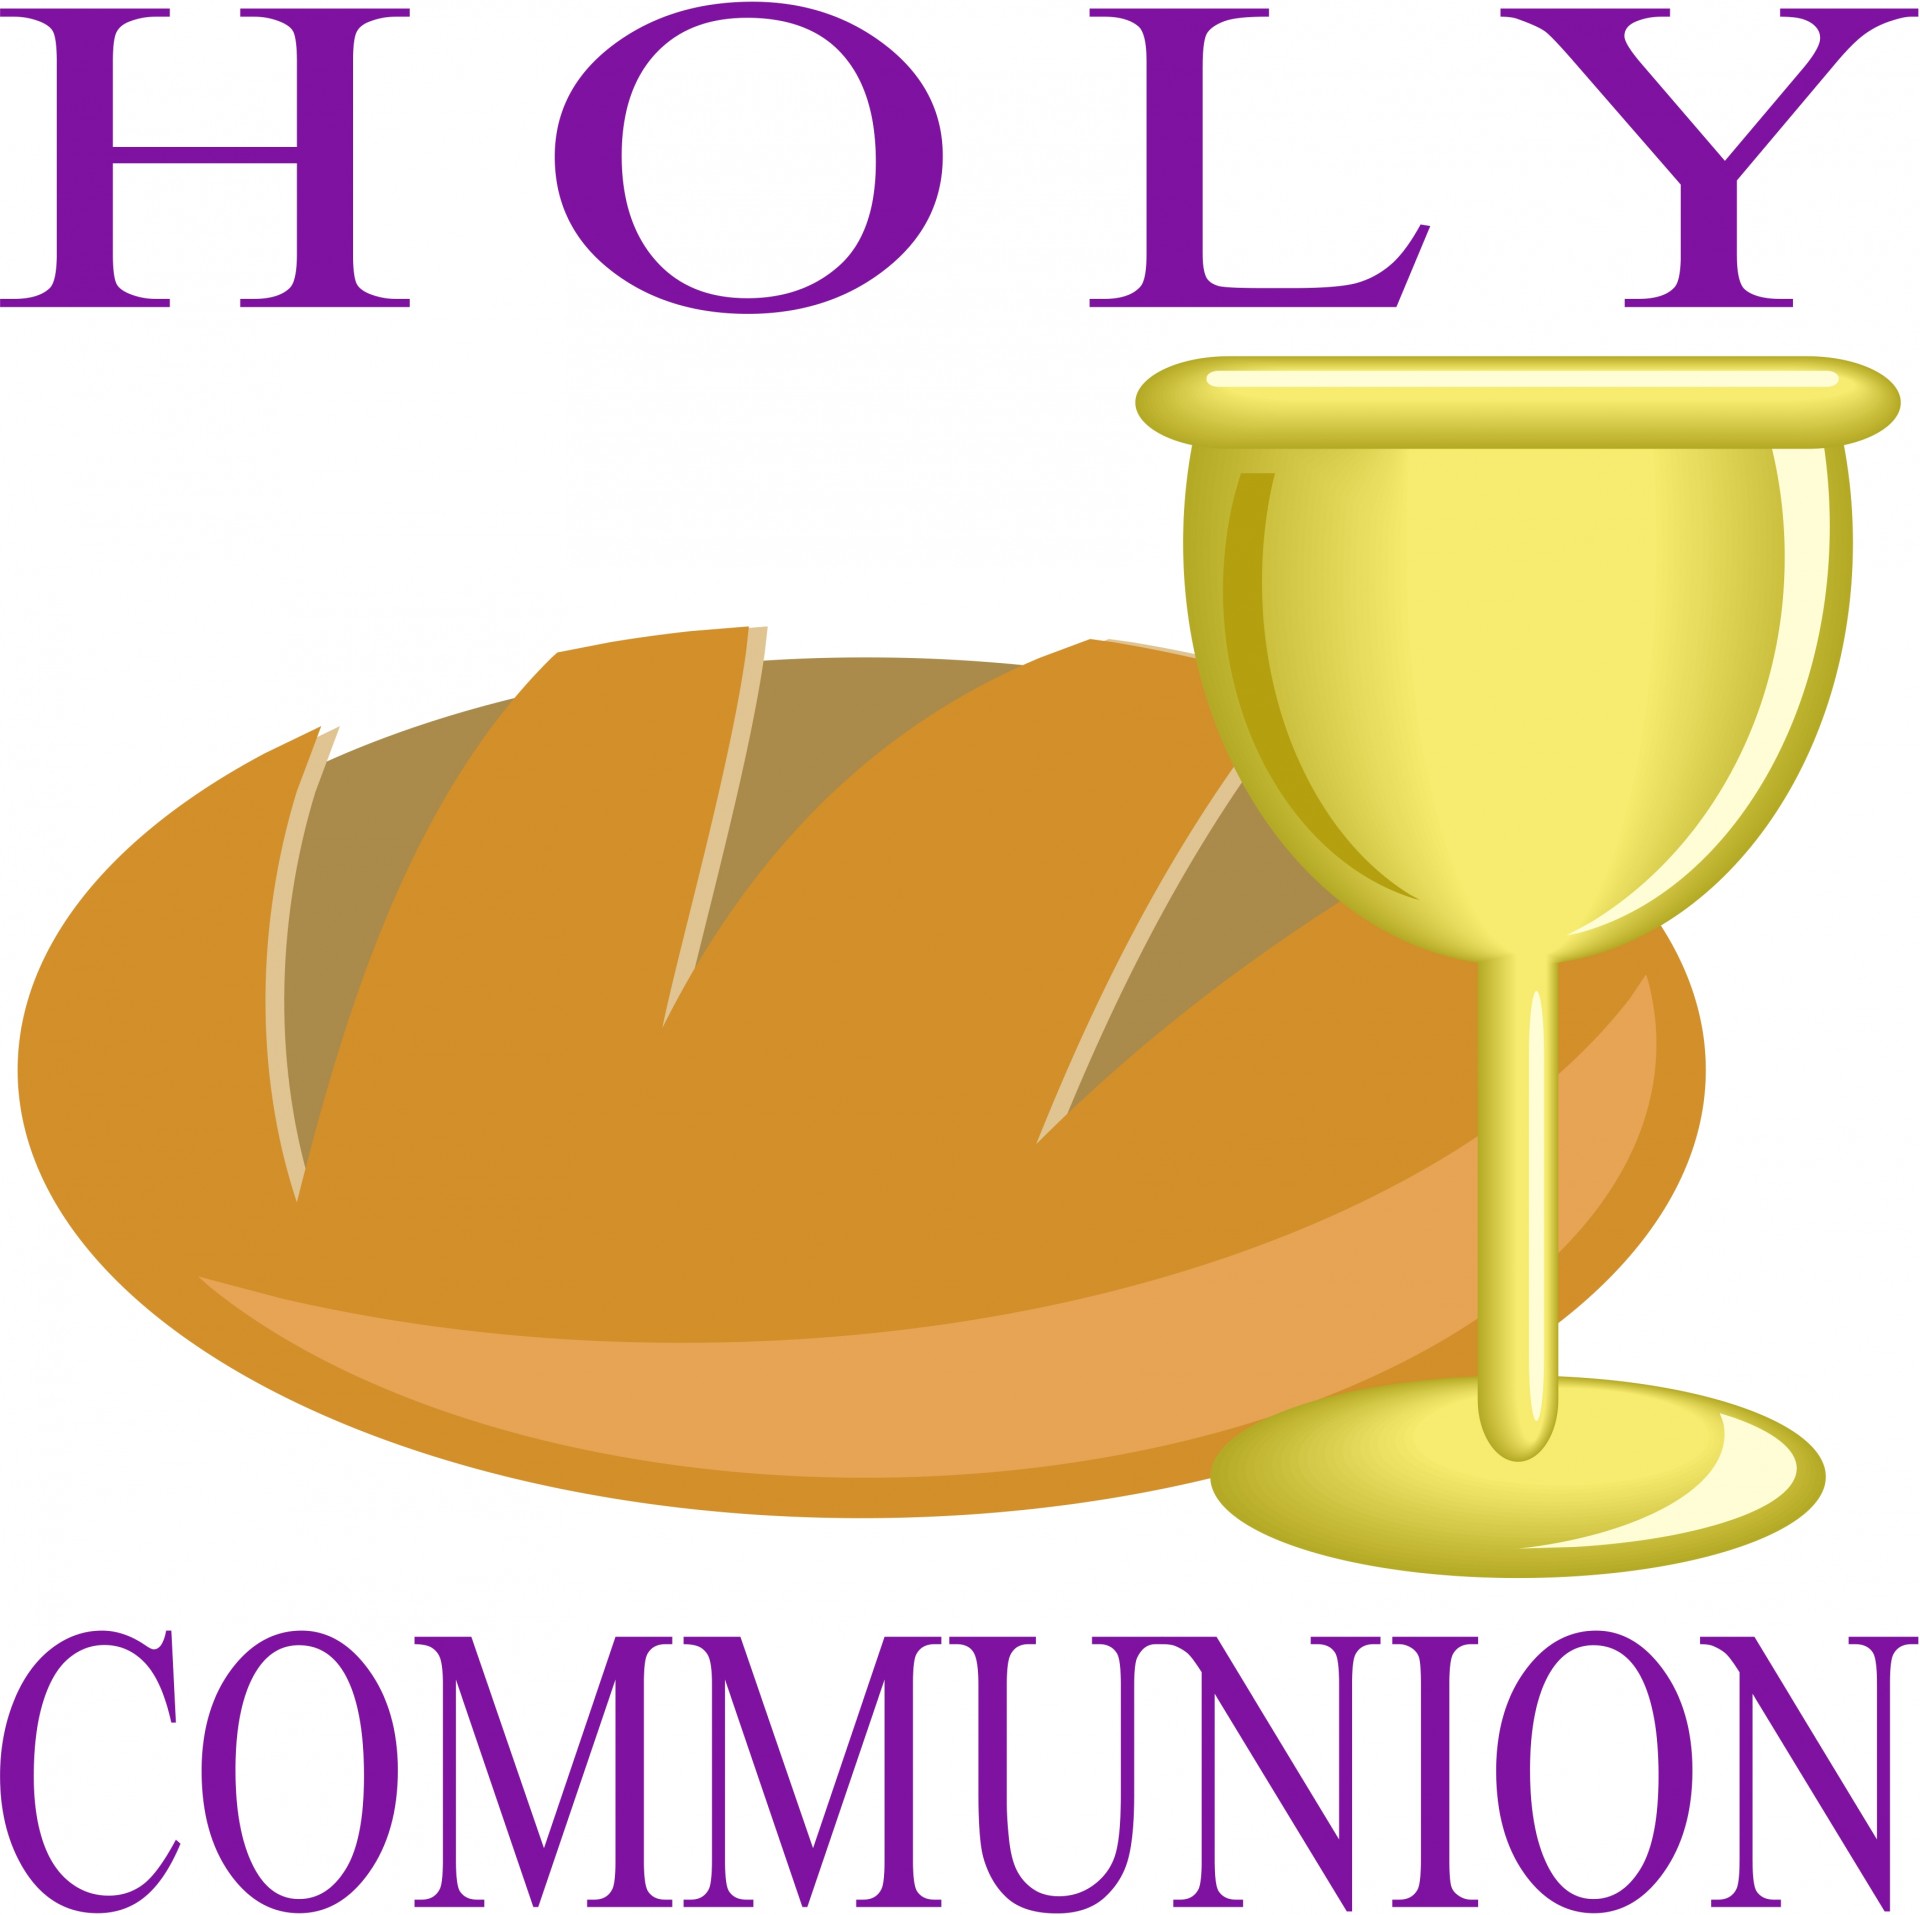 Free christian clipart holy communion